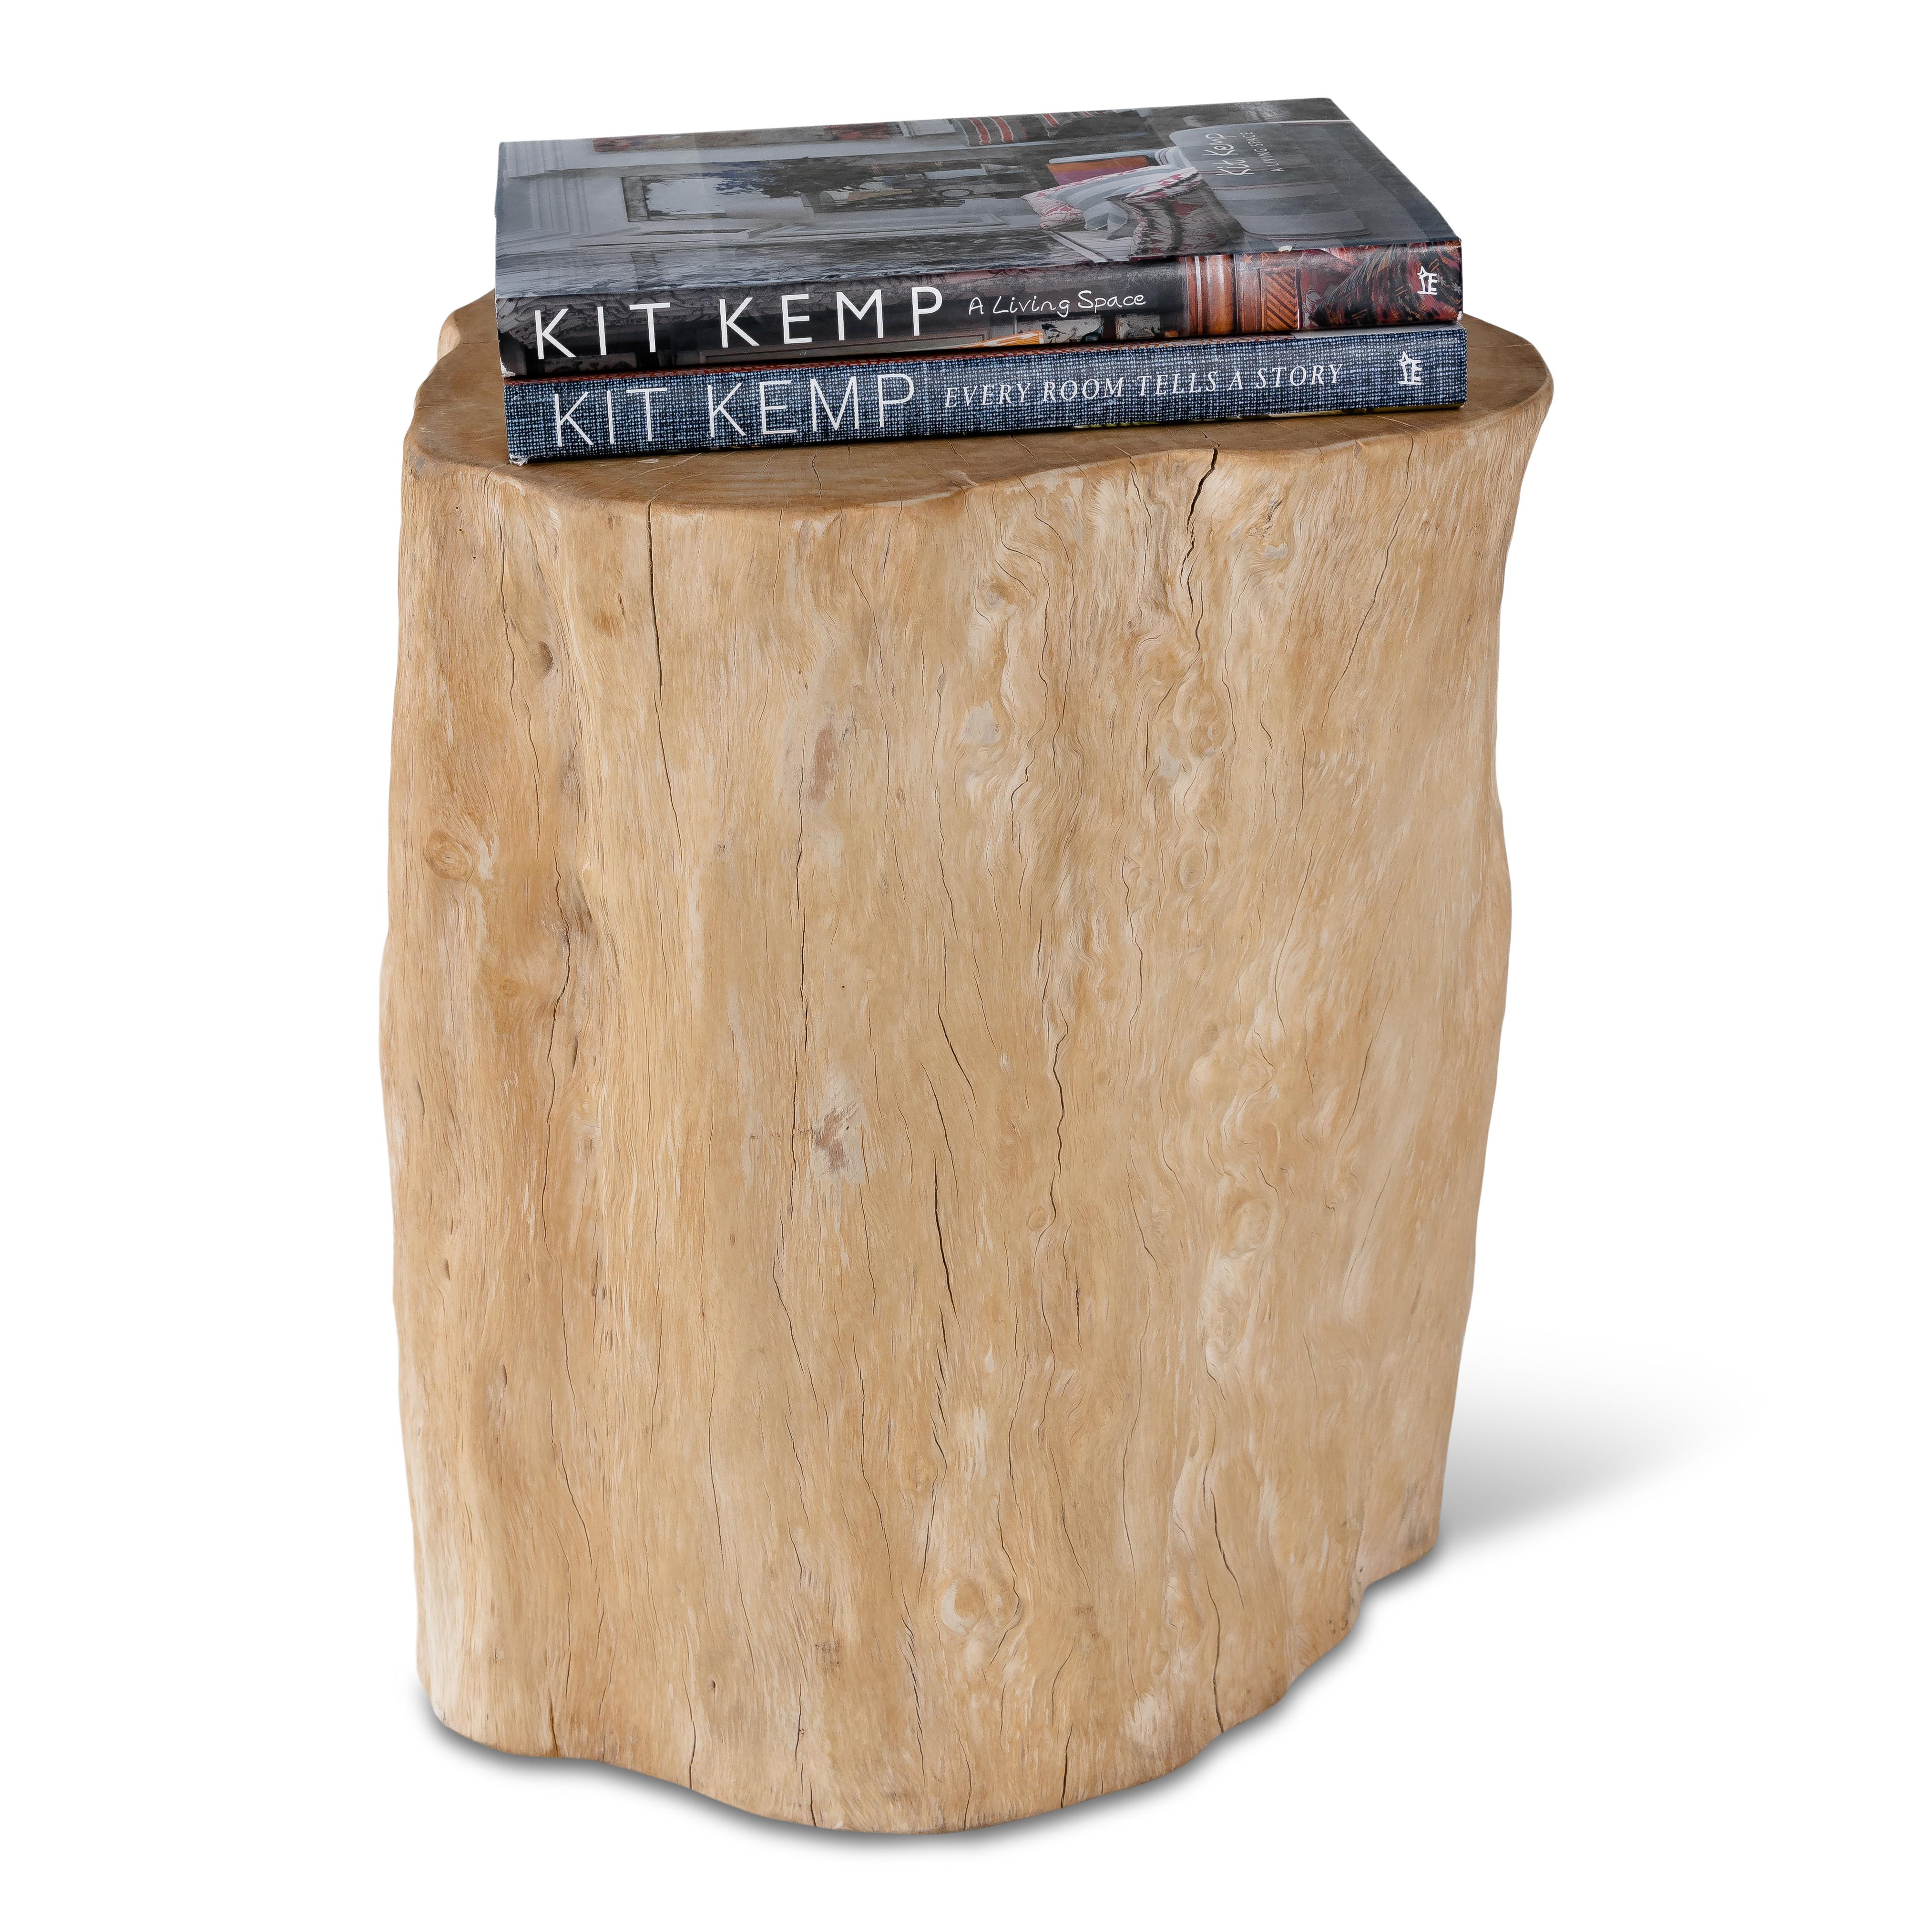 Organic form bleached iron wood stump table.

This piece is a part of Brendan Bass’s one-of-a-kind collection, Le Monde. French for “The World”, the Le Monde collection is made up of rare and hard to find pieces curated by Brendan from estate sales,